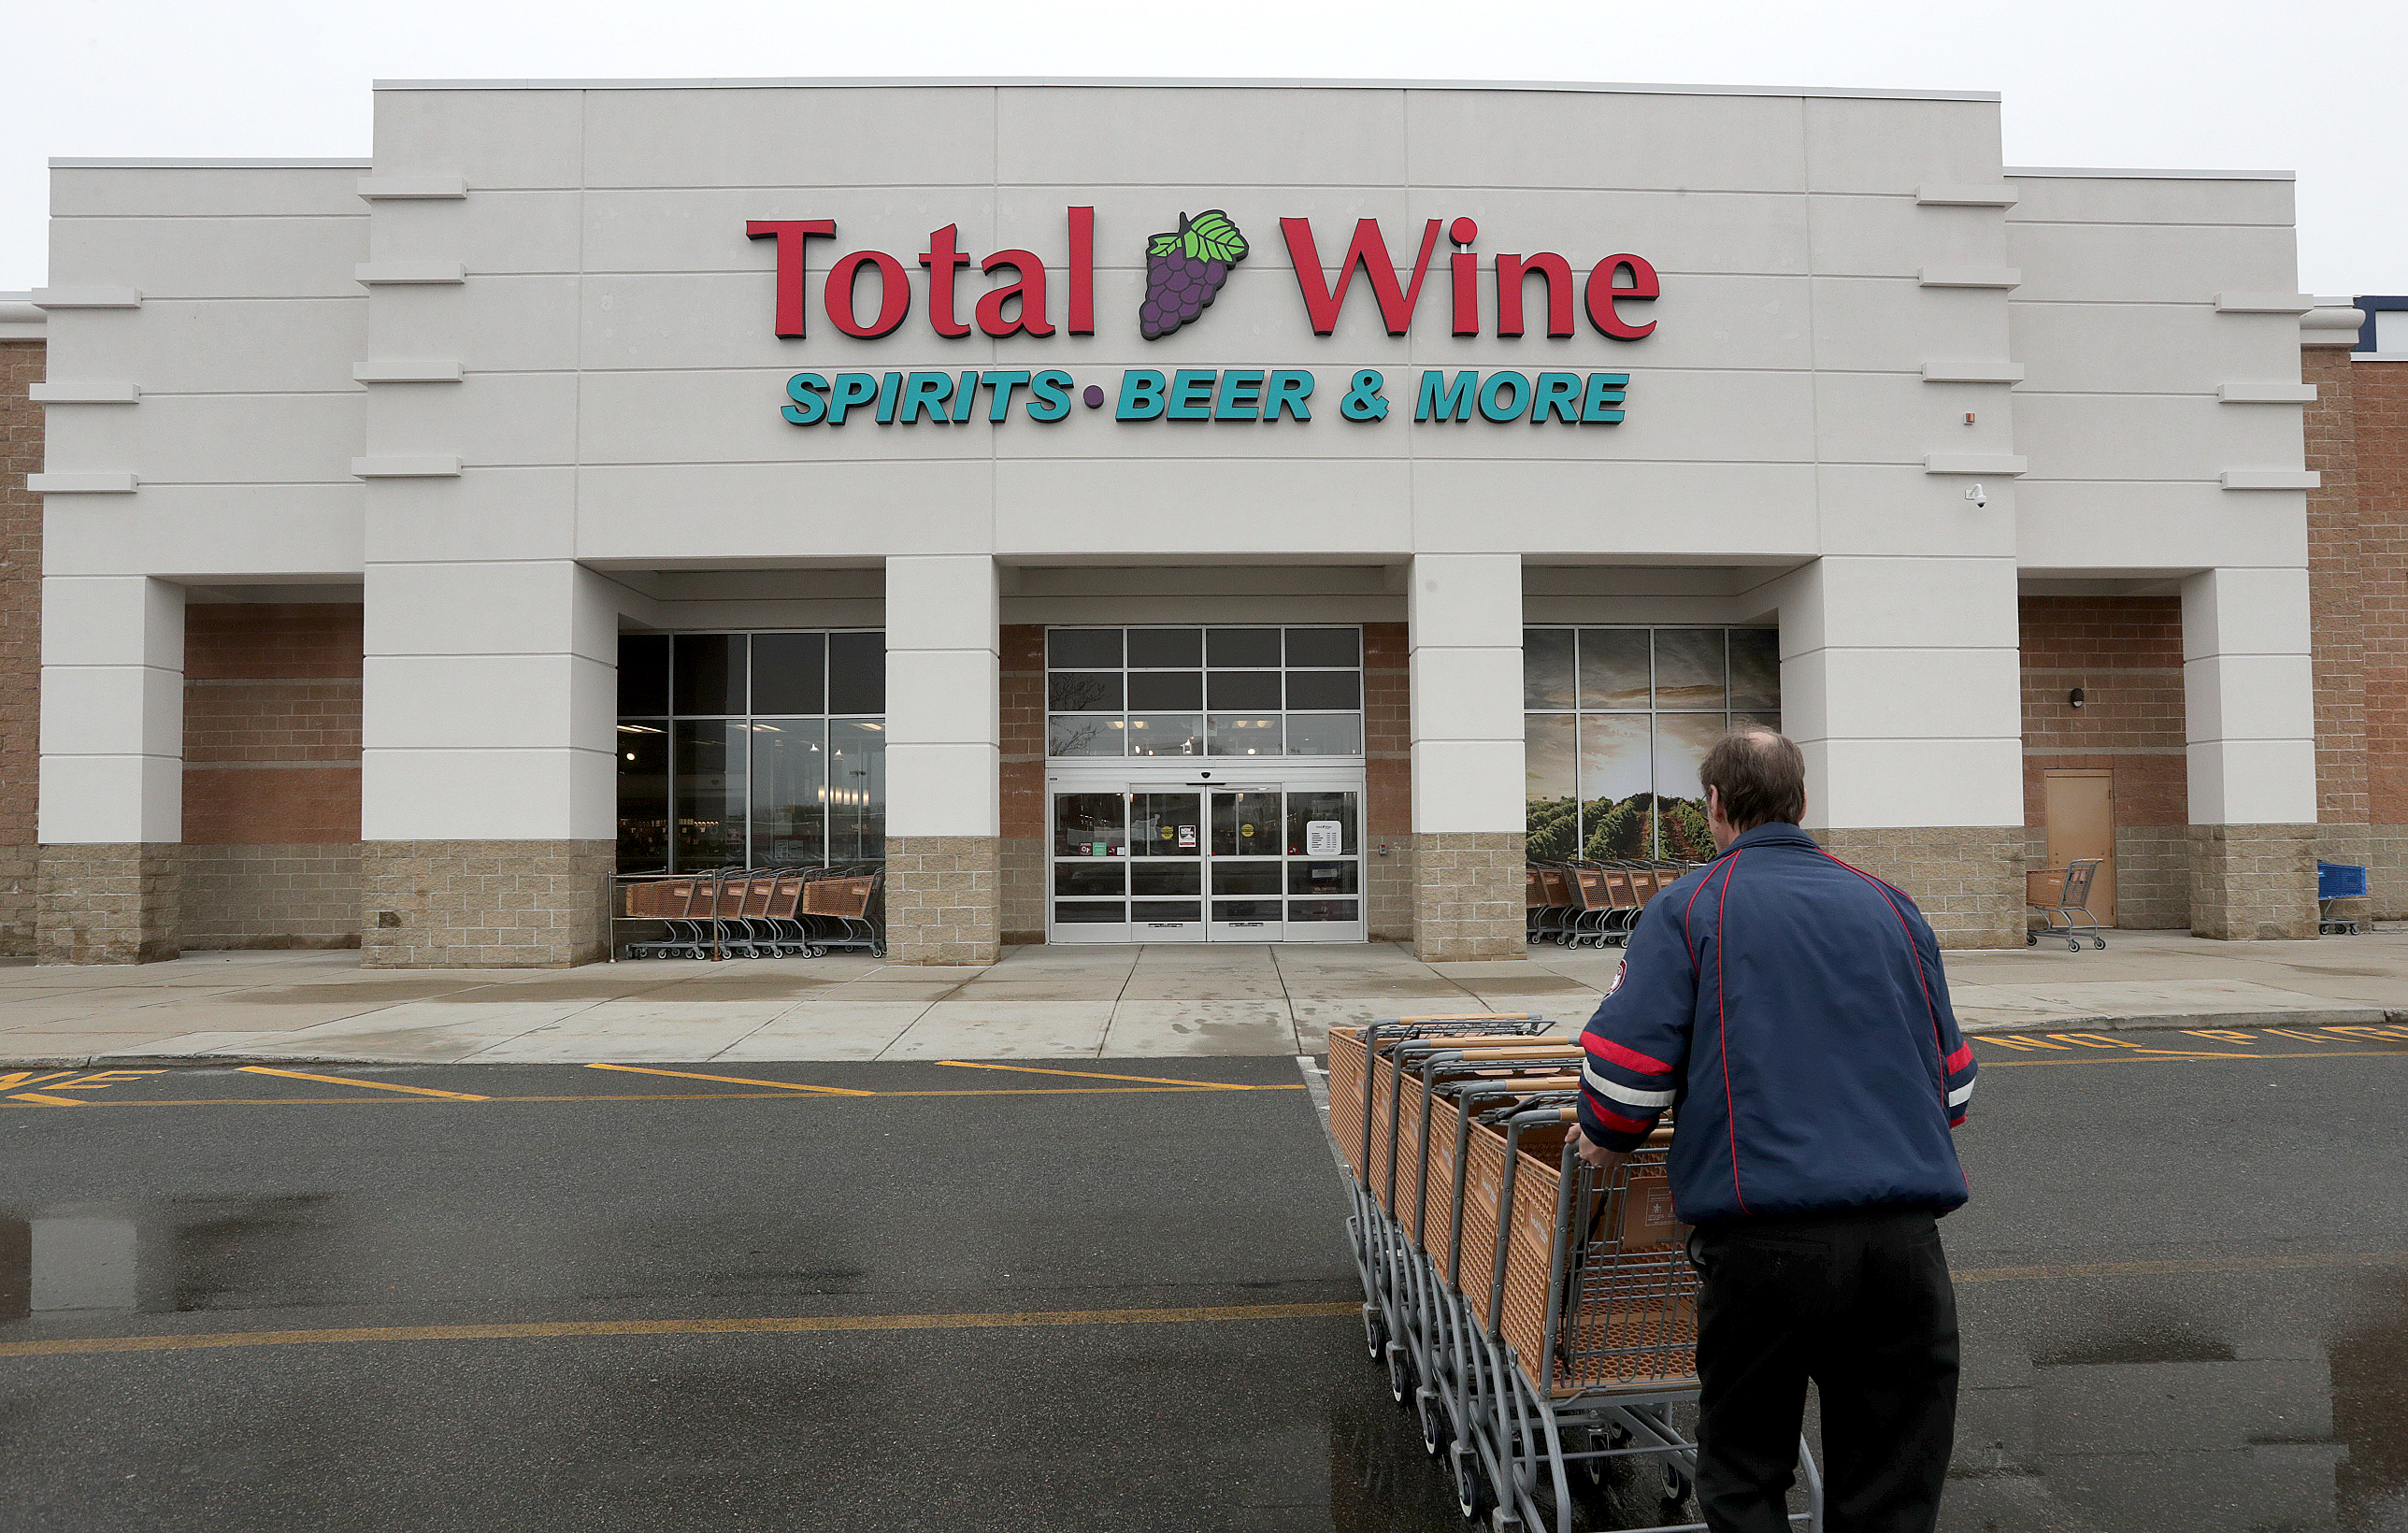 PHOTO: The Total Wine & More store in Everett, MA.